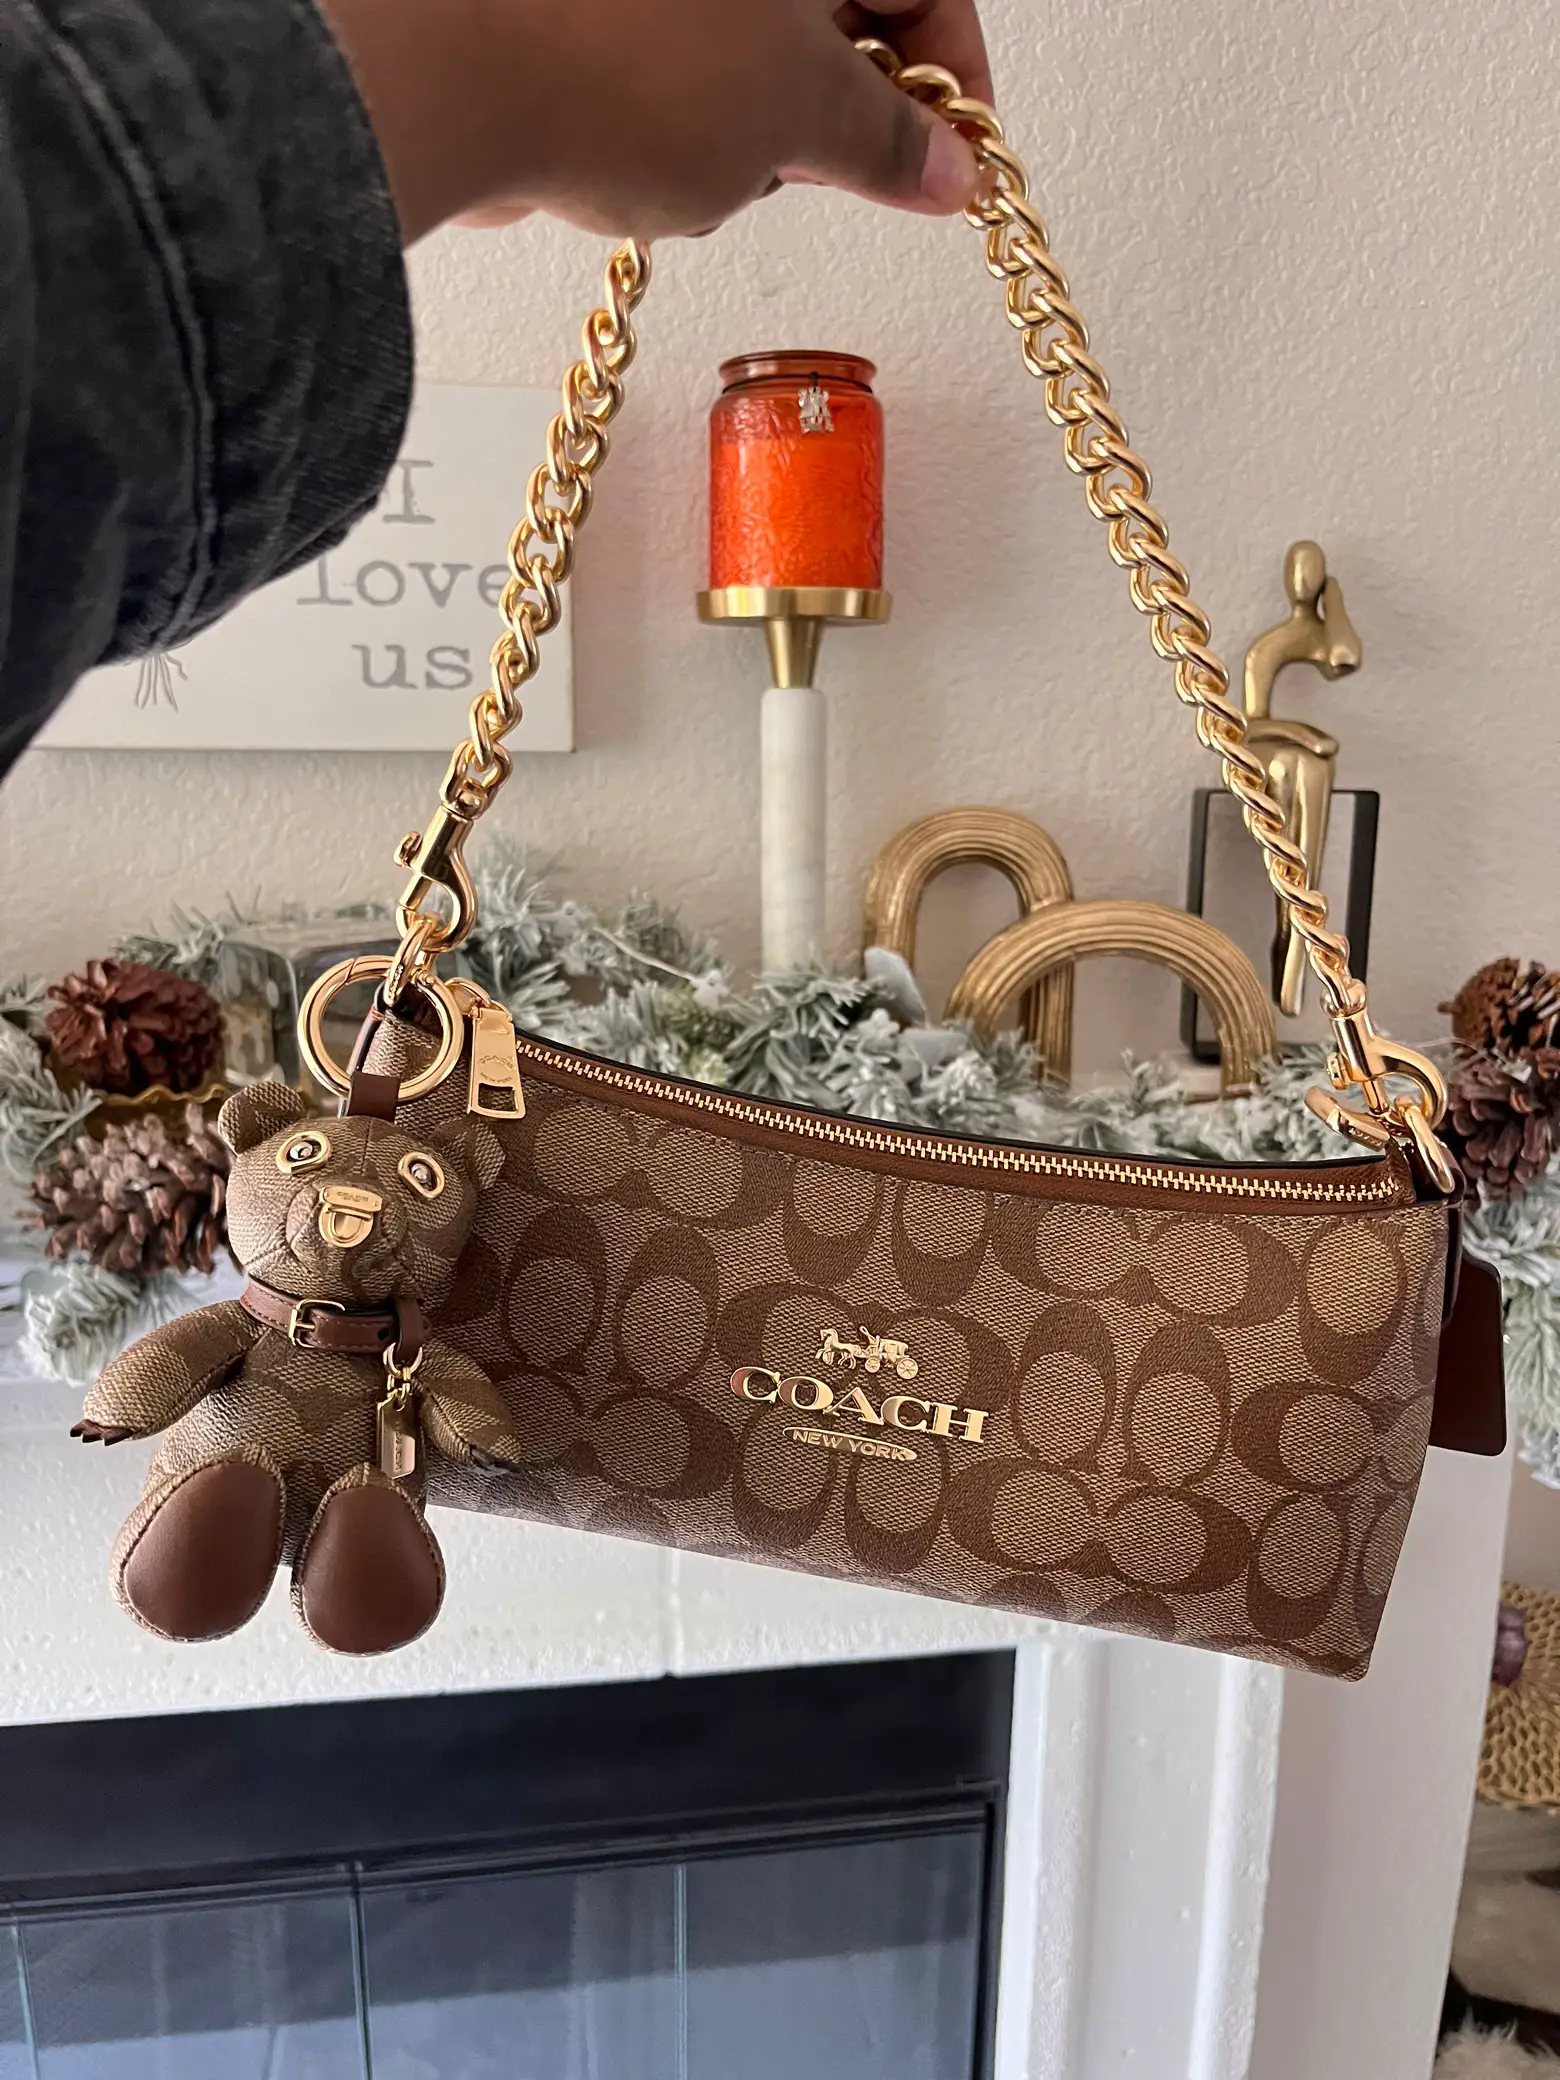 Coach Charlotte Shoulder Bag - new collection from Coach! 😍 LIKE kala